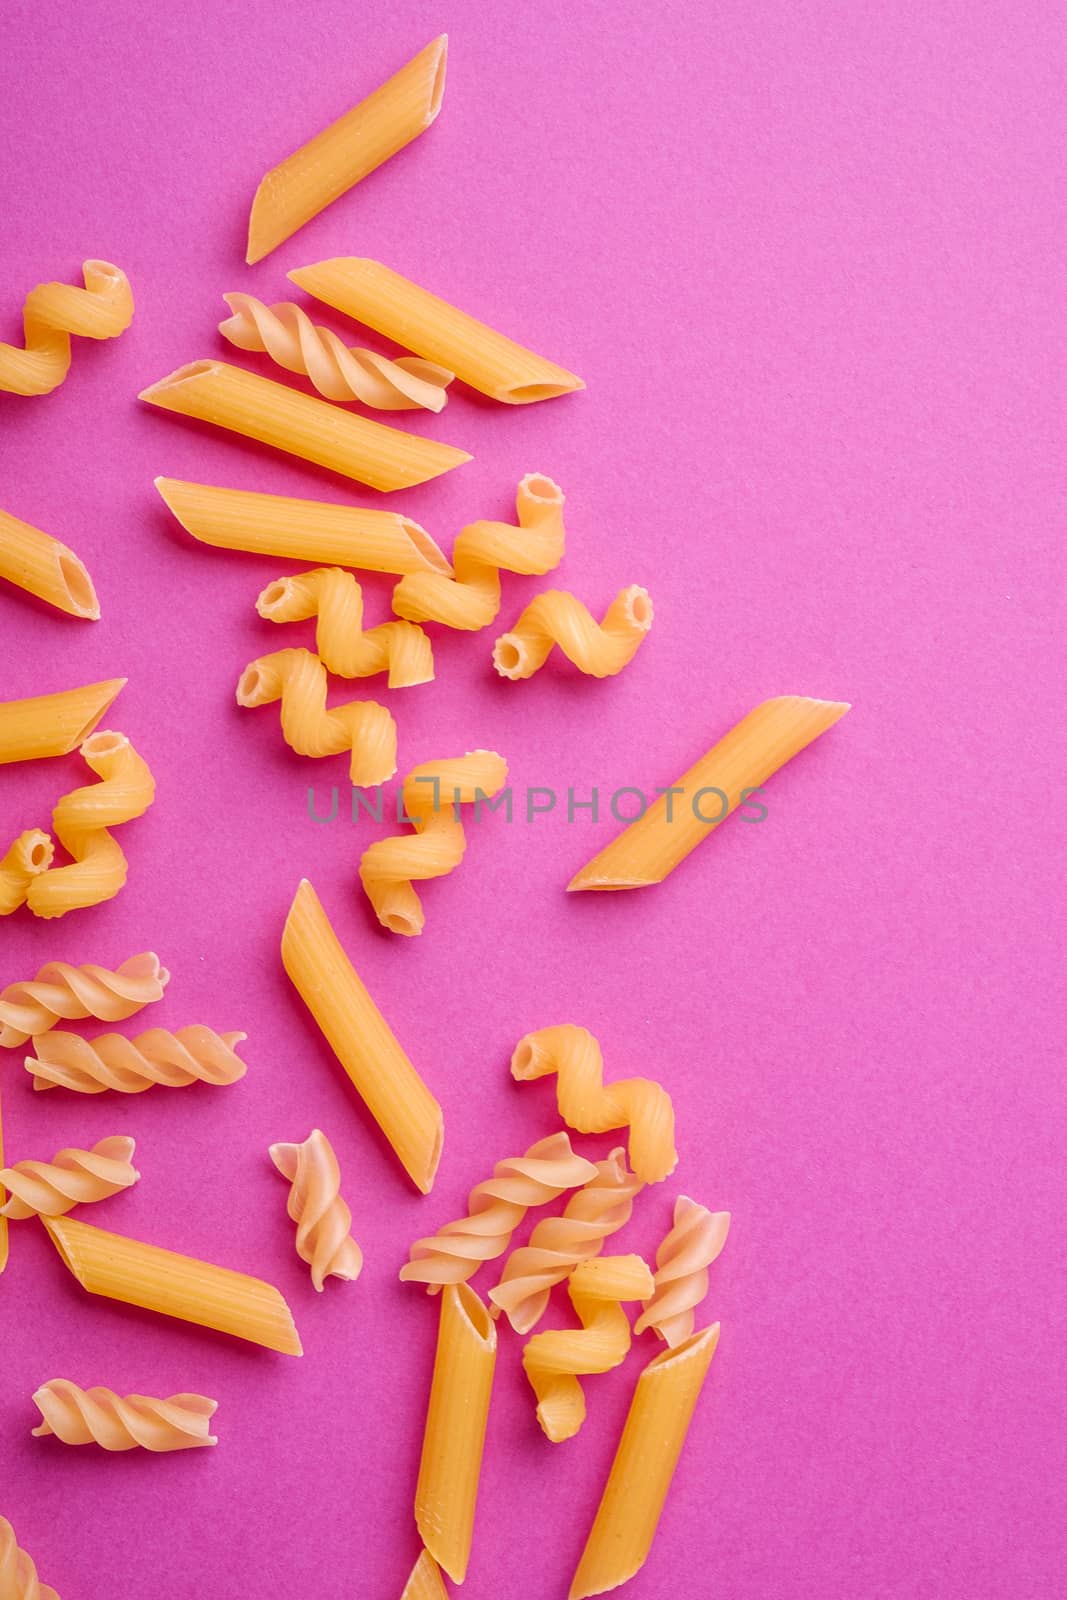 Scattered variety of uncooked golden wheat pasta on minimal pink background, top view